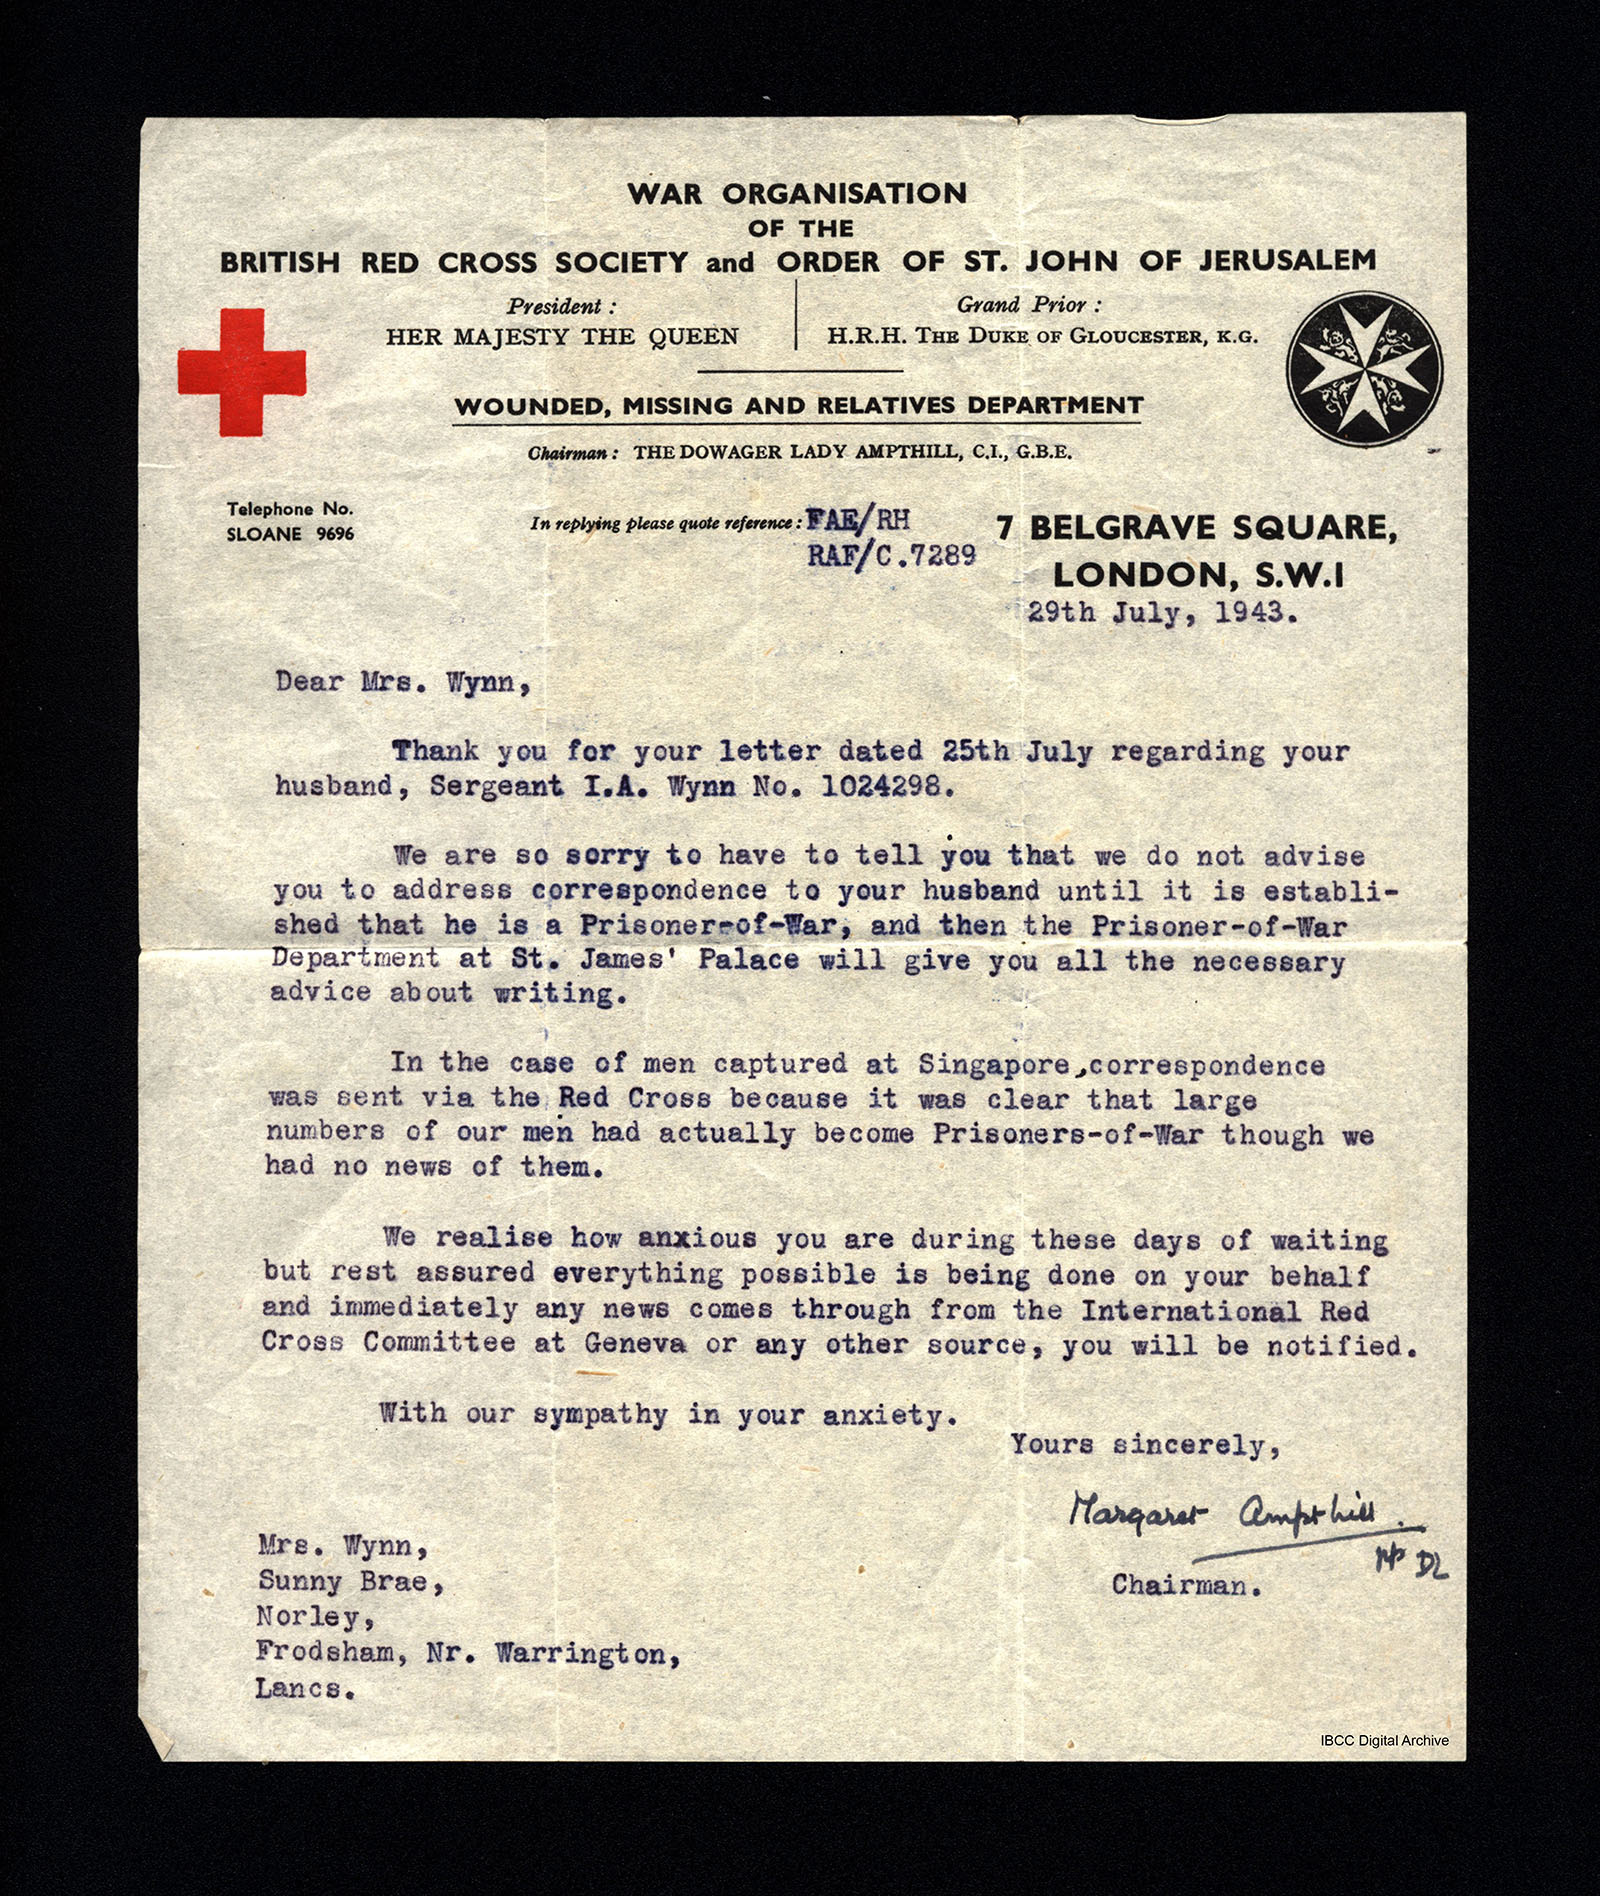 Letter To Mrs Wynn From British Red Cross Ibcc Digital Archive